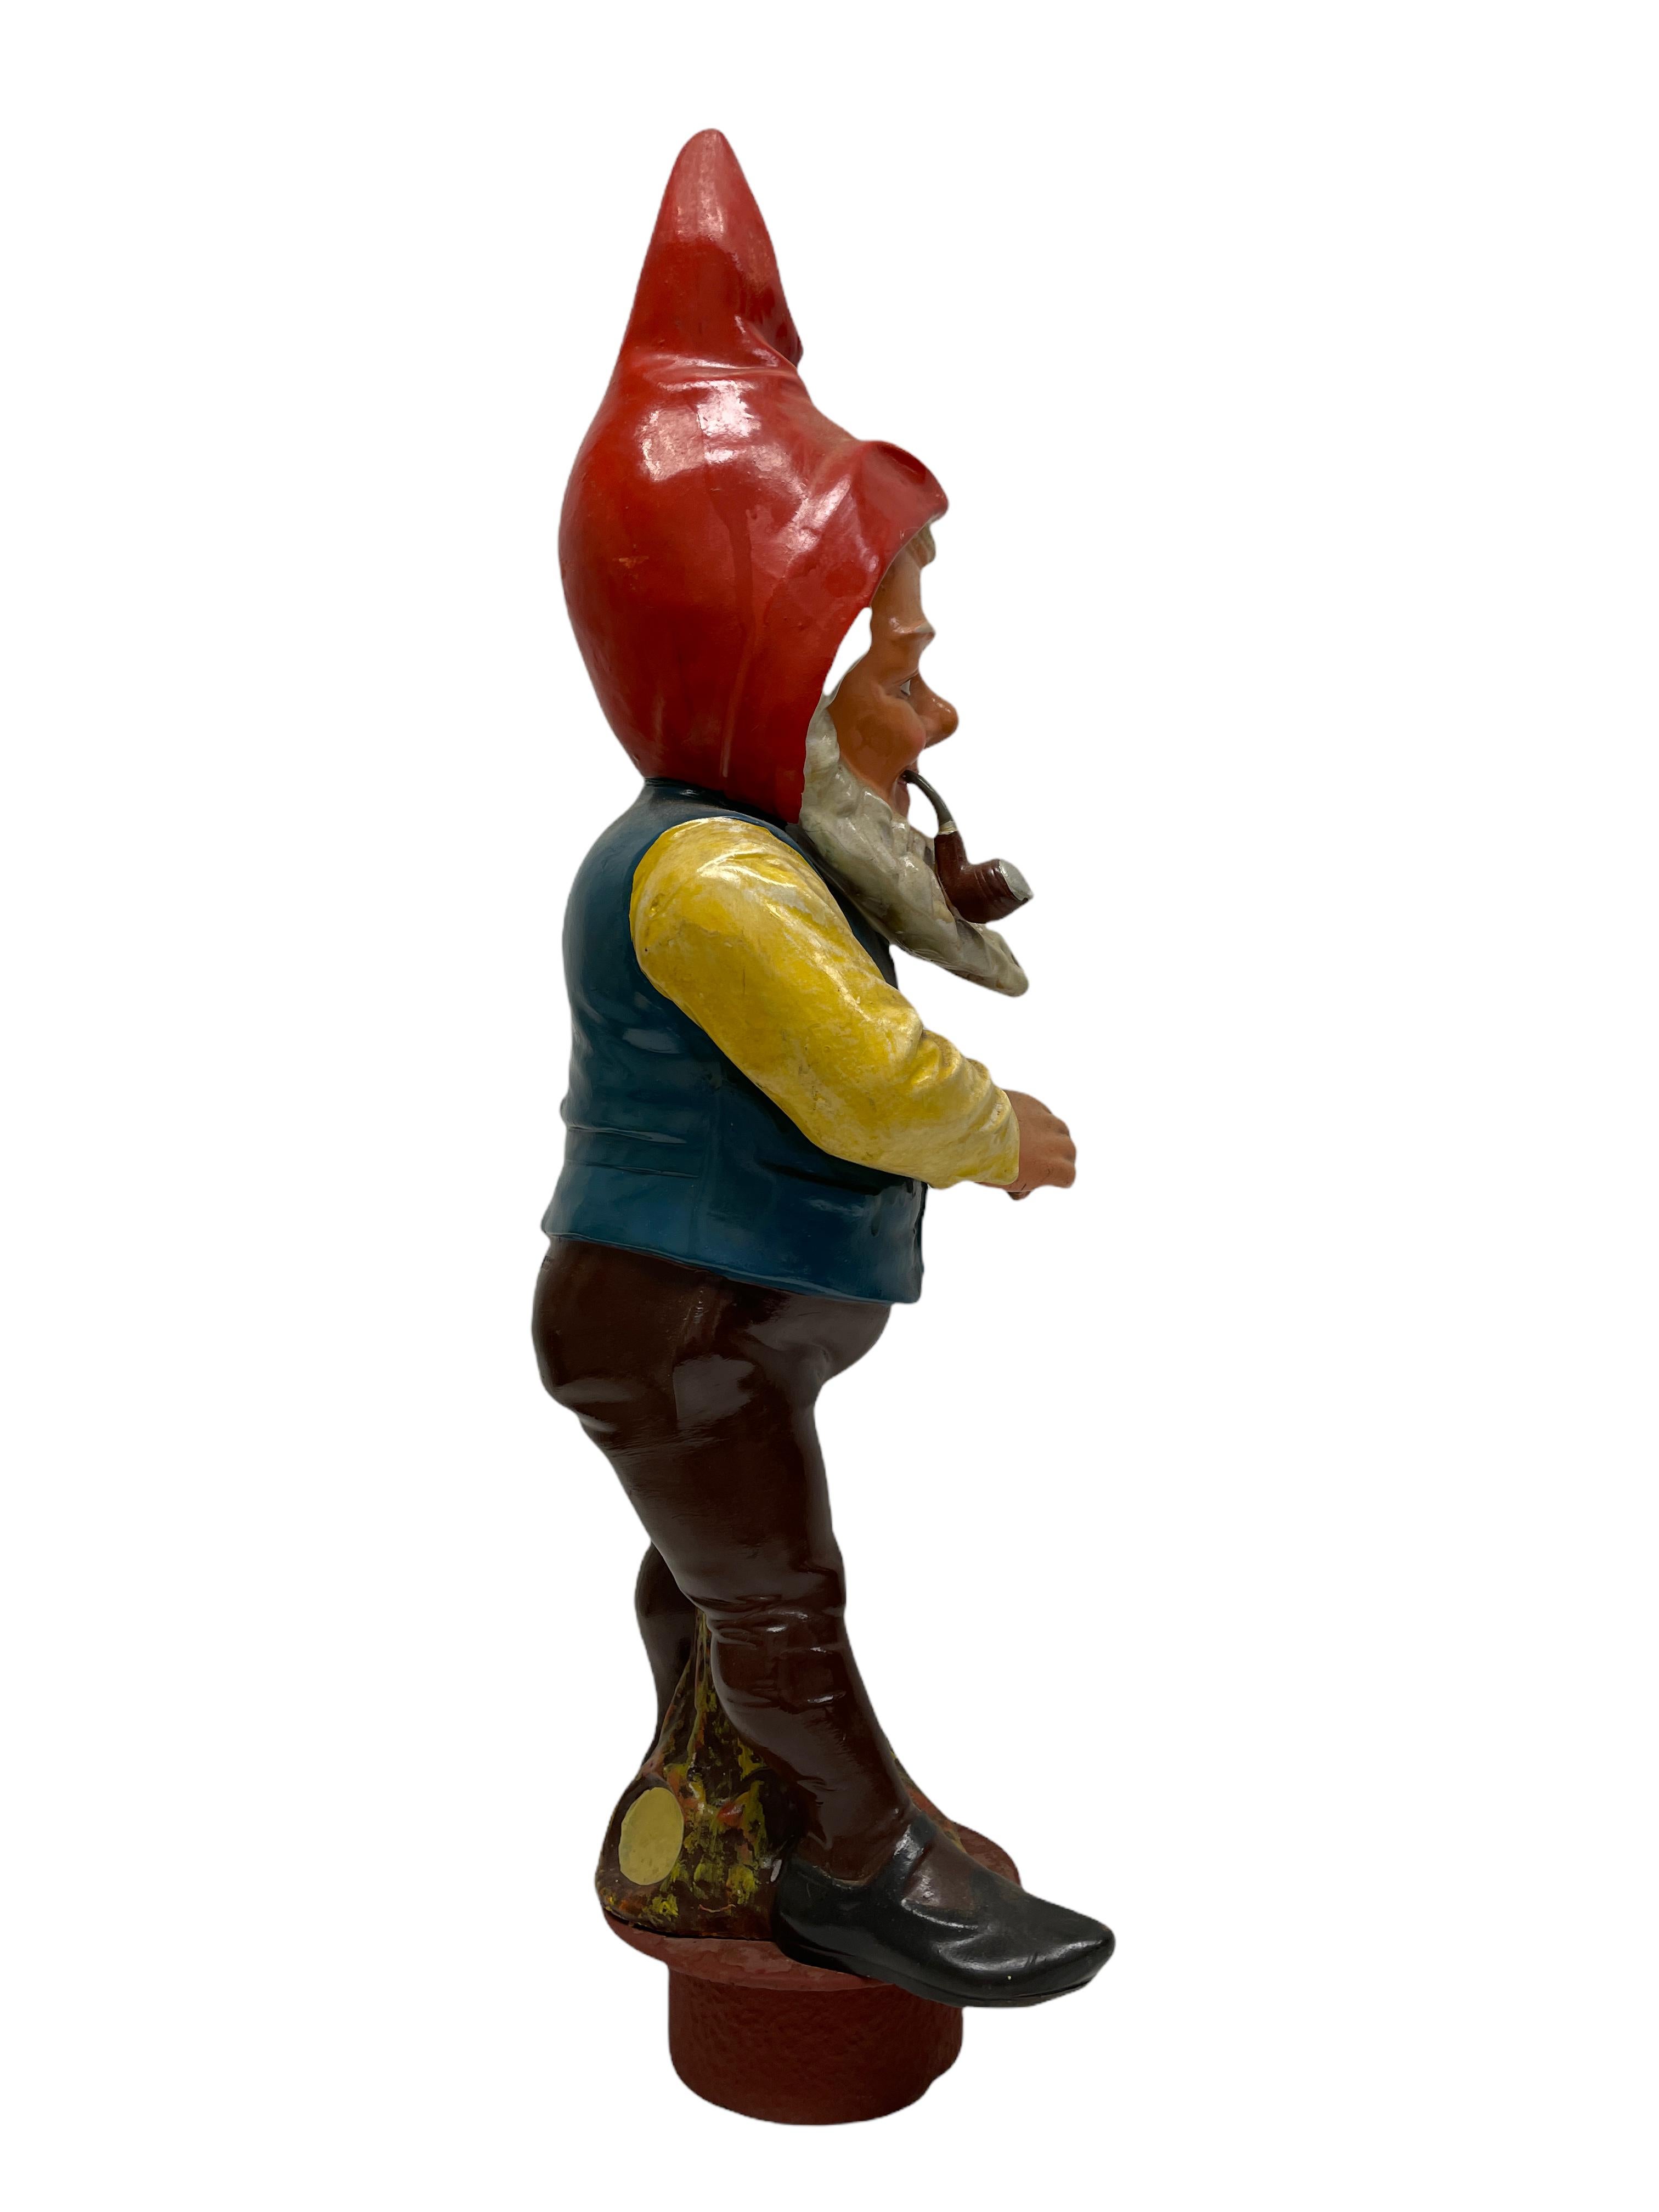 Hand-Painted Monumental Vintage German Yard or Garden Gnome Statue, 1930s